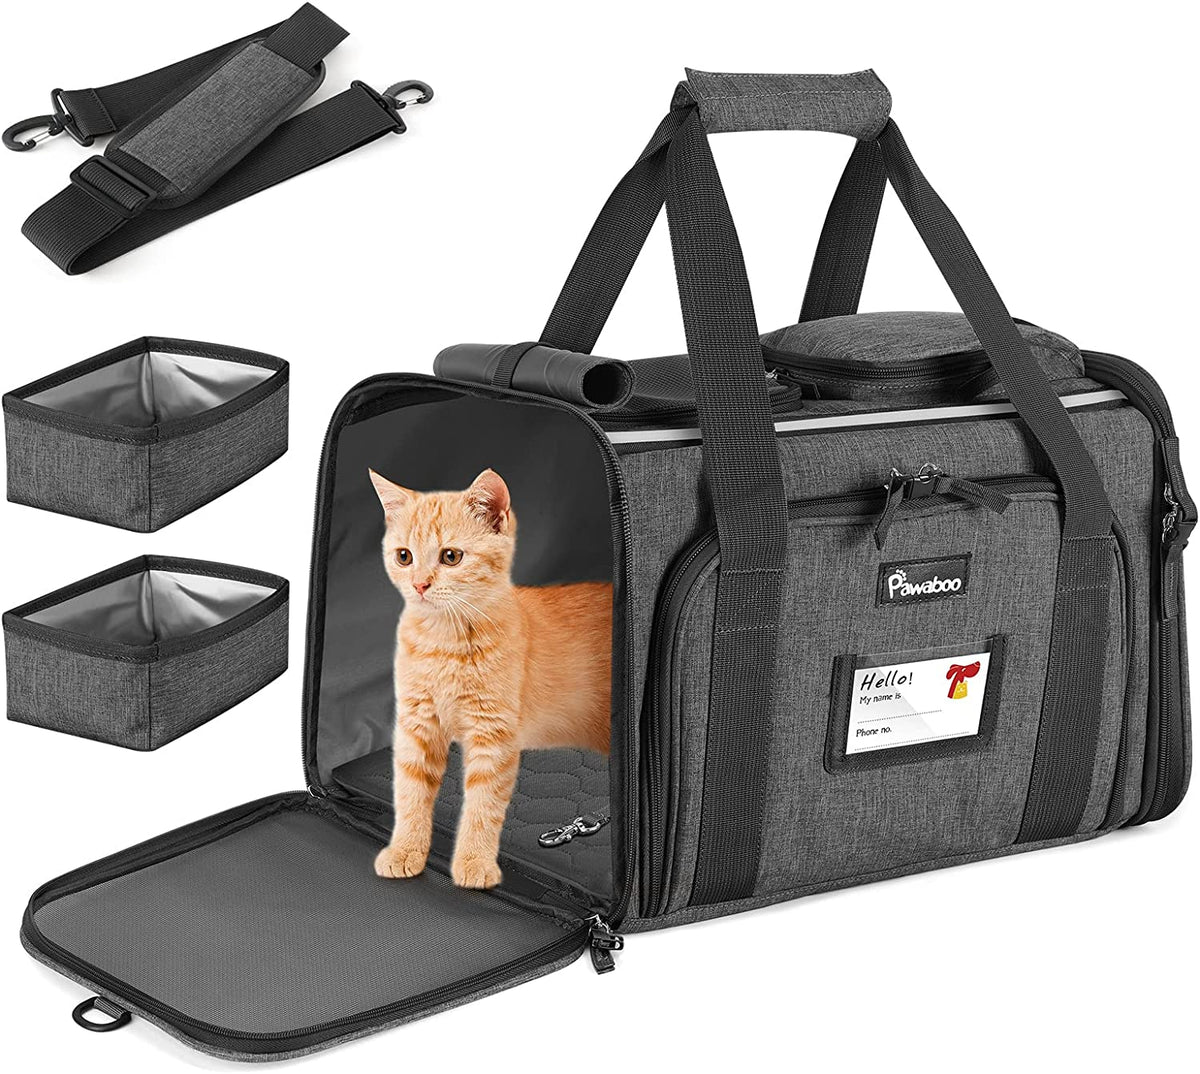 Airline Approved Pet Carrier with 2 Bowls